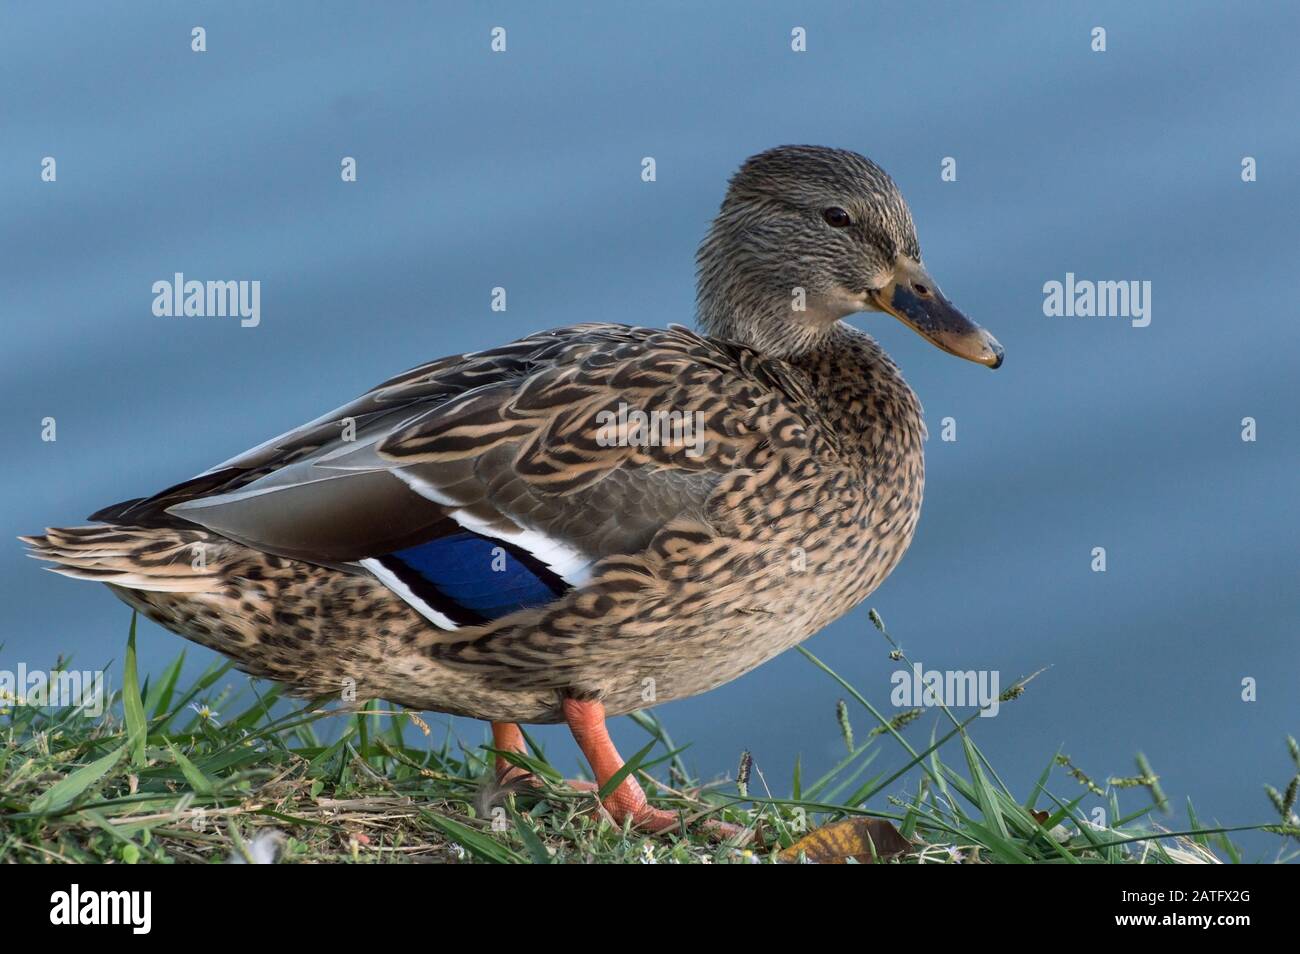 Beautiful female Mallard Duck standing on the shore of a pond showing the brilliant contrast of the blue striped feathers in her wing. Stock Photo